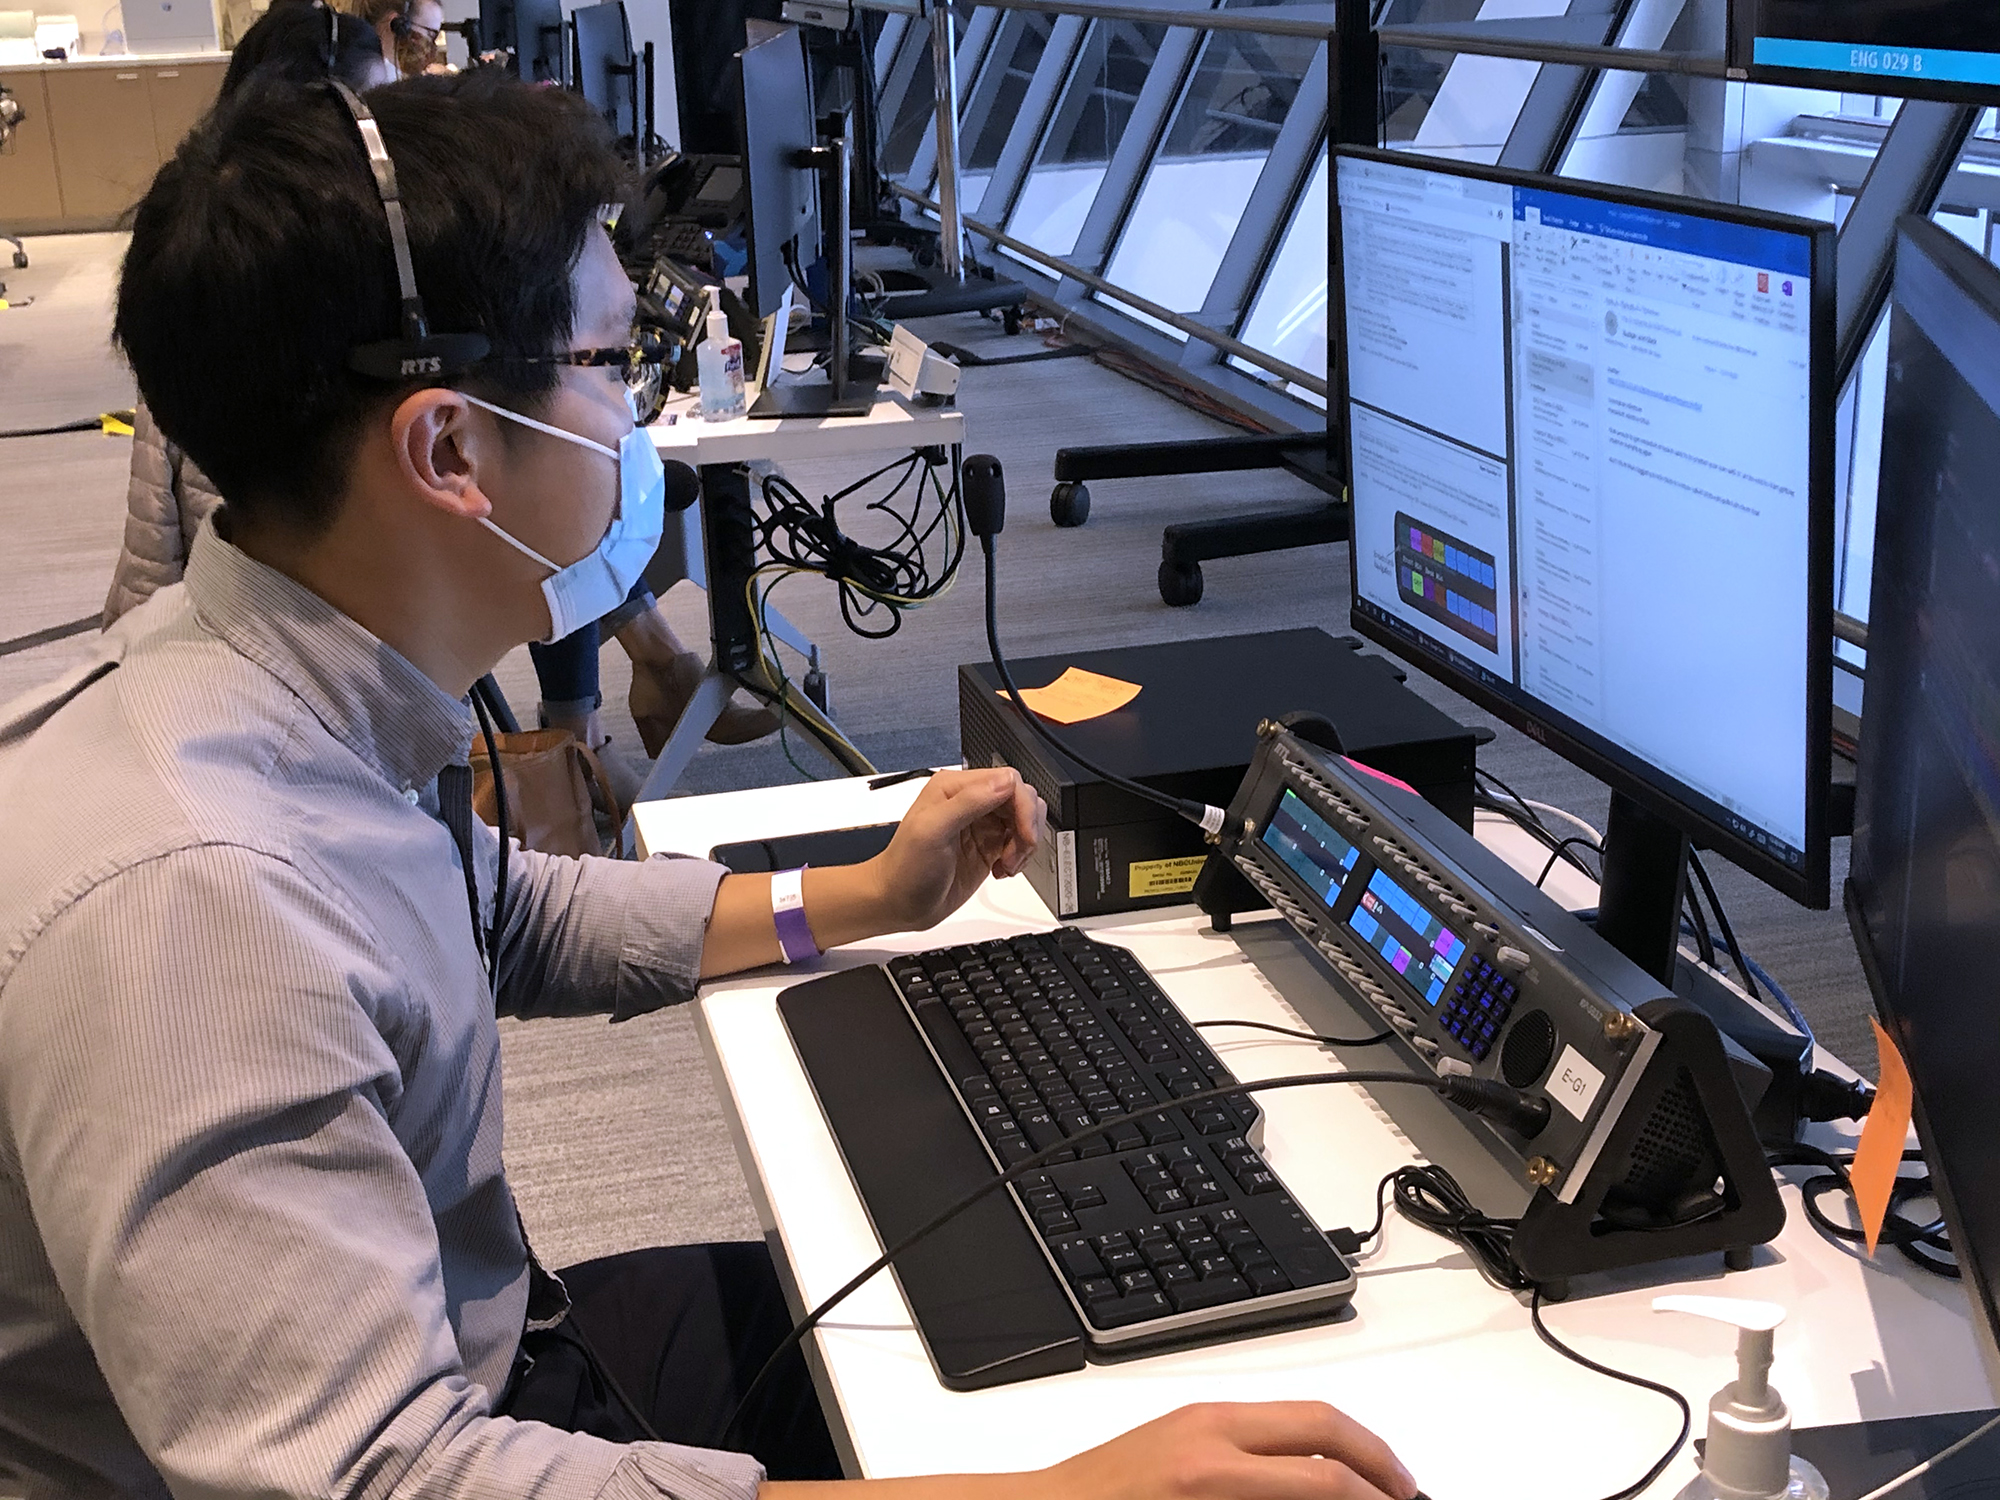 Leonard Chen, a junior and philosophy, politics and economics major, worked from 4 p.m. to 4 a.m. on the exit poll desk at the Comcast Center. (Image: Andrew Arenge)